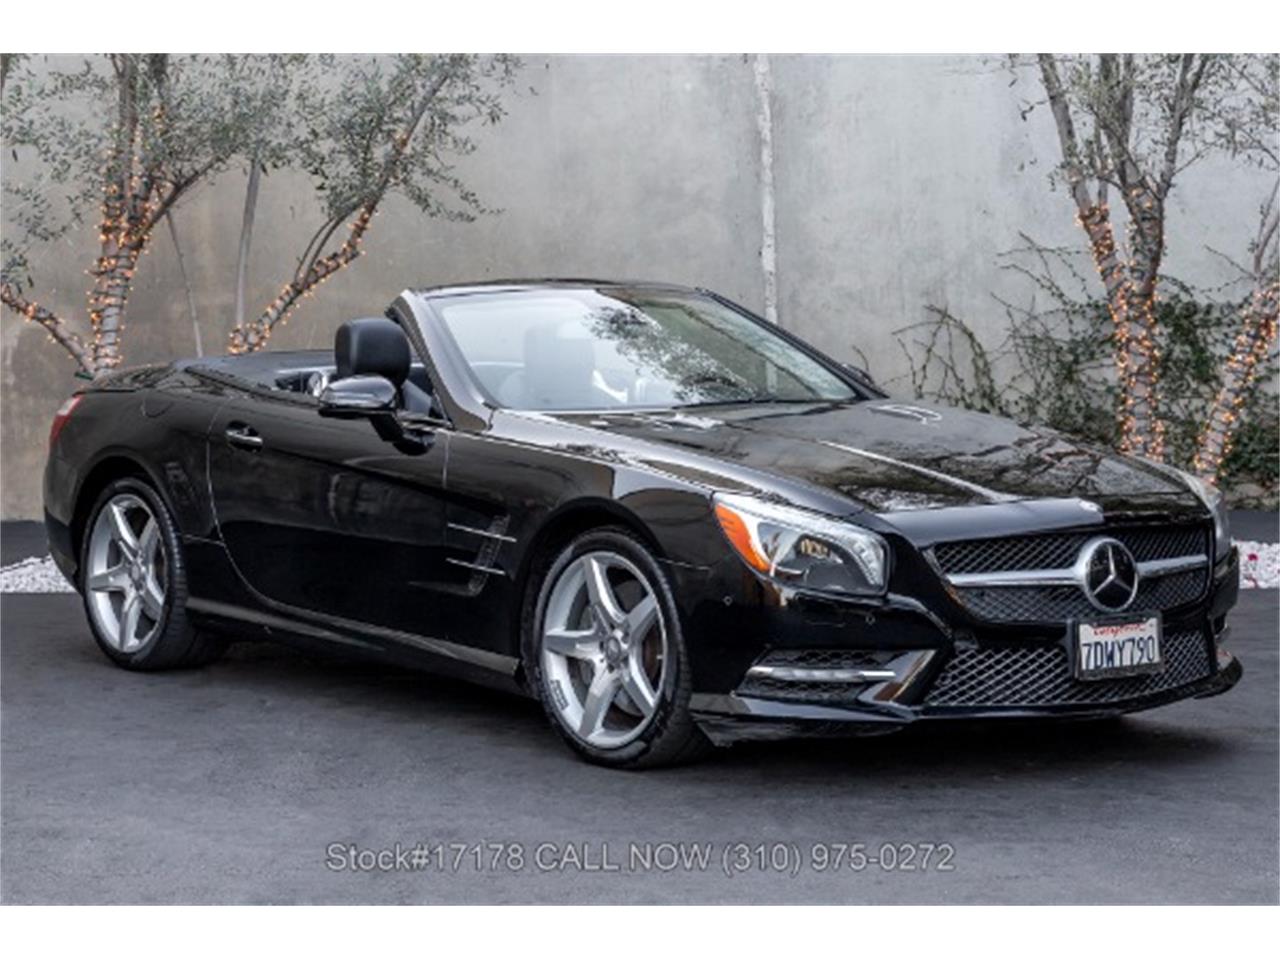 For Sale: 2013 Mercedes-Benz SL550 in Beverly Hills, California for sale in Beverly Hills, CA